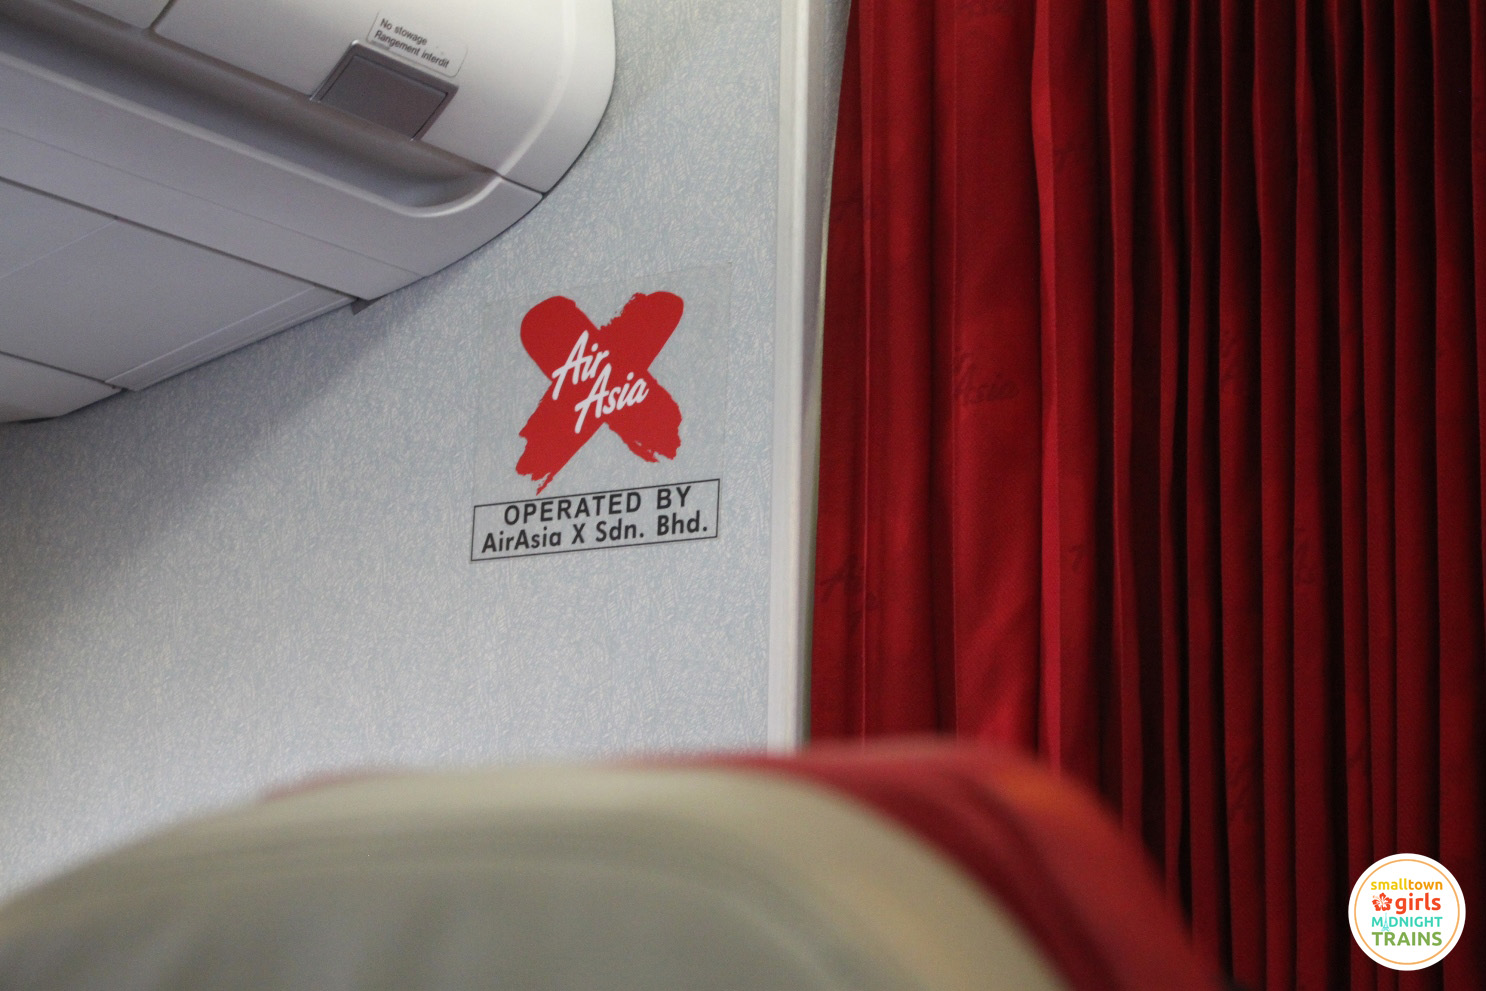 When you're cooped up in an airplane for hours on end, you do silly things like take photos of logos.